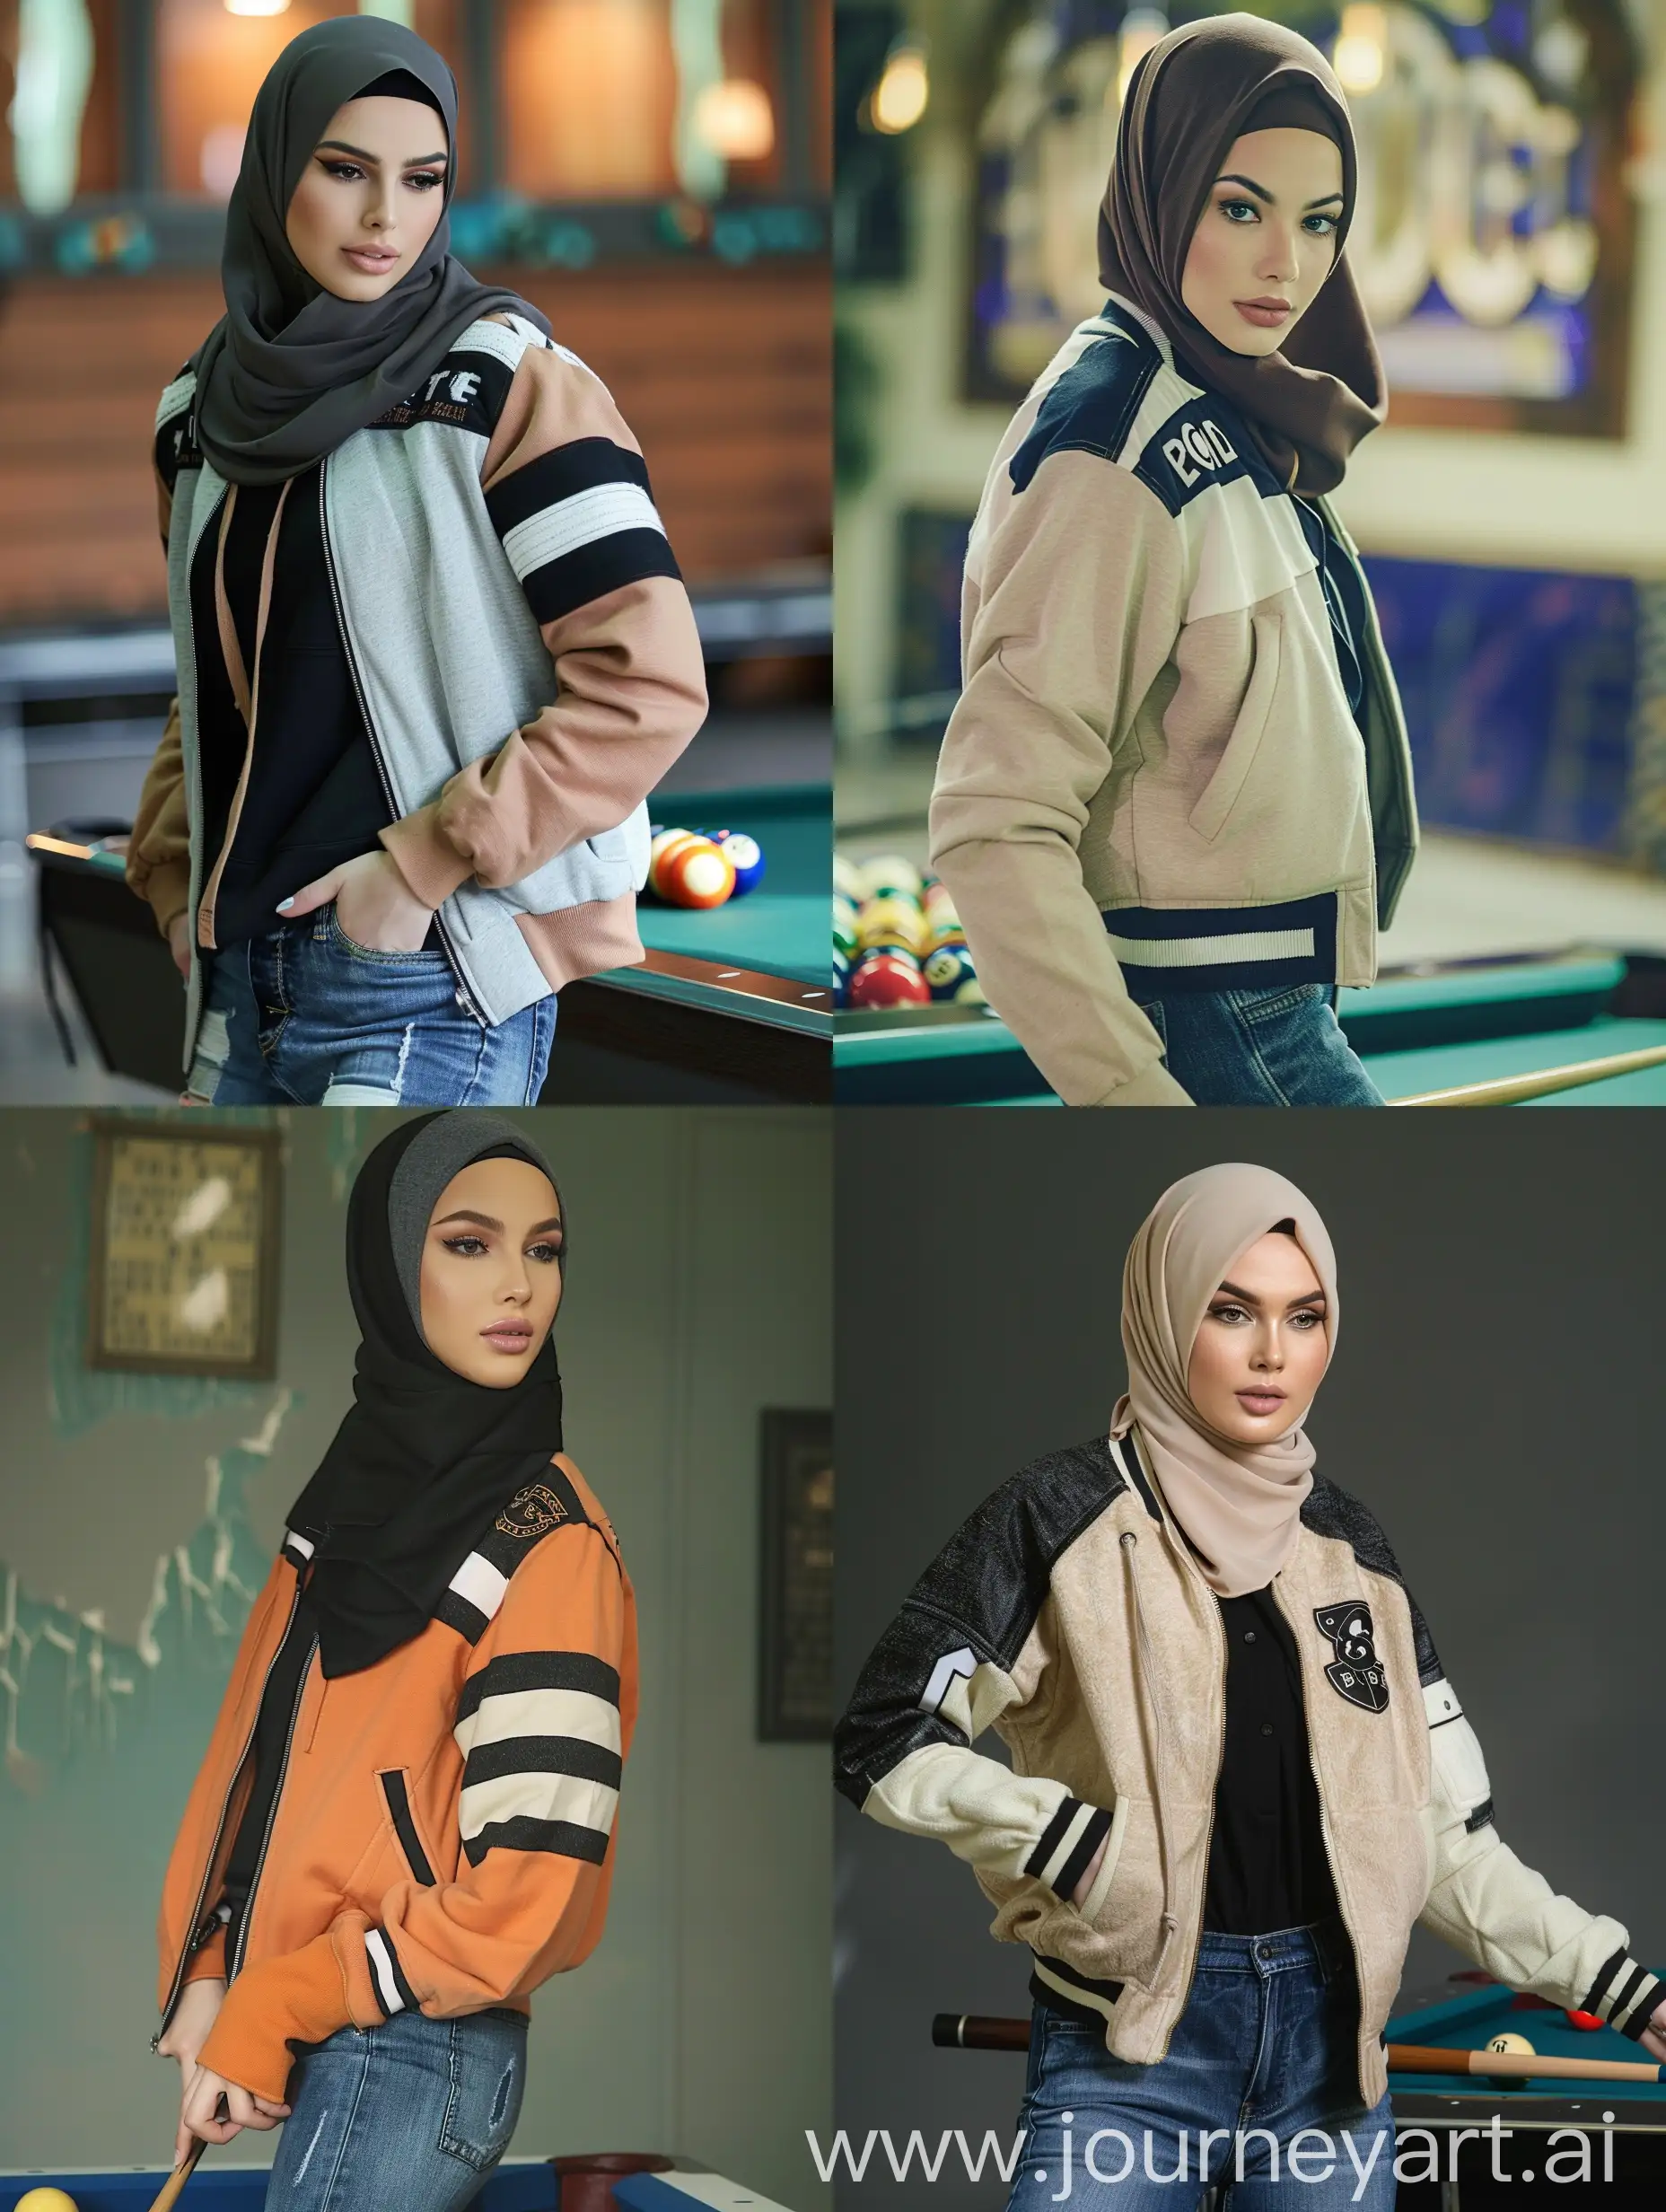 Stylish-Woman-in-Hijab-Playing-Billiards-in-Varsity-Jacket-and-Jeans